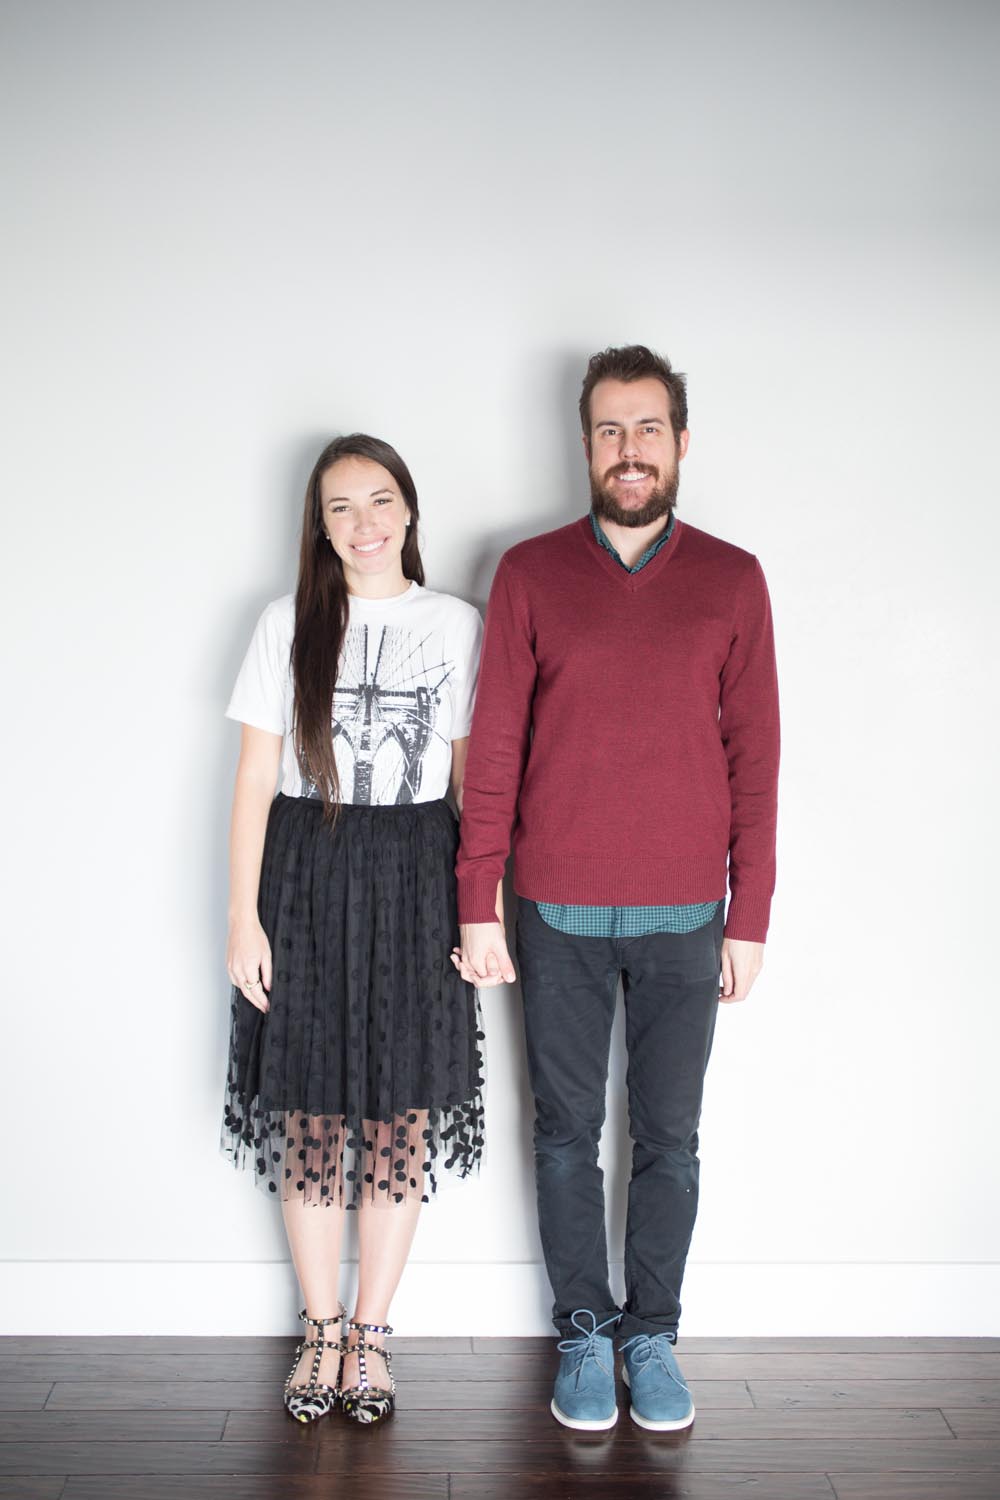 Kelseybang.com- a his and her style blog